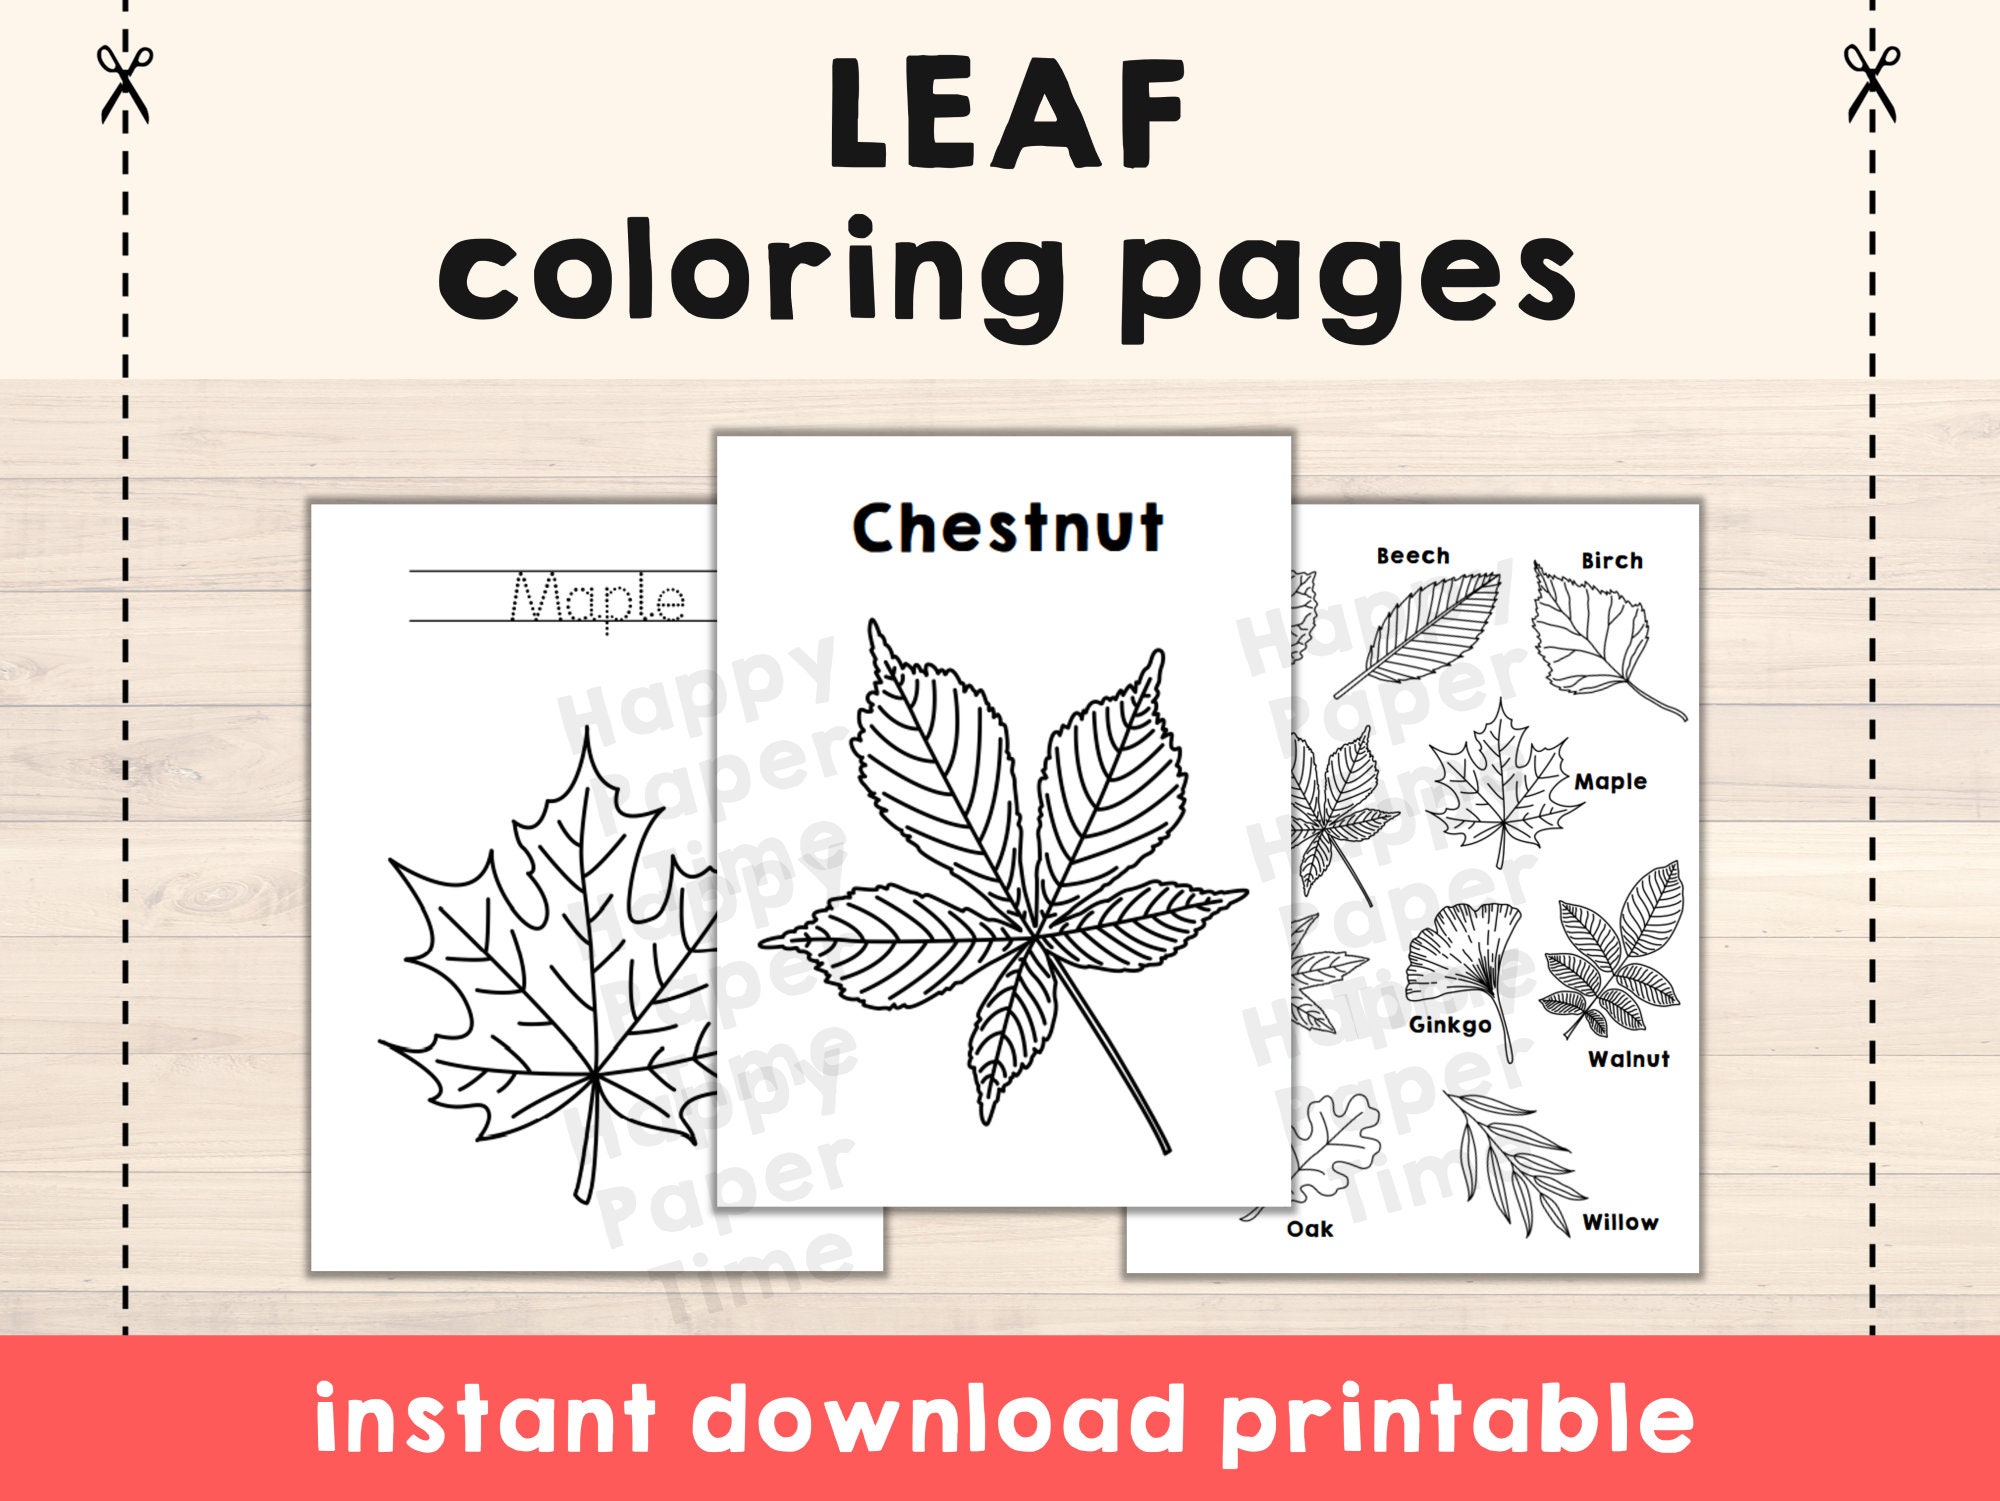 Leaf coloring pages fall autumn leaves printable nature biology art craft activity for kids with tracing pdf file instant download